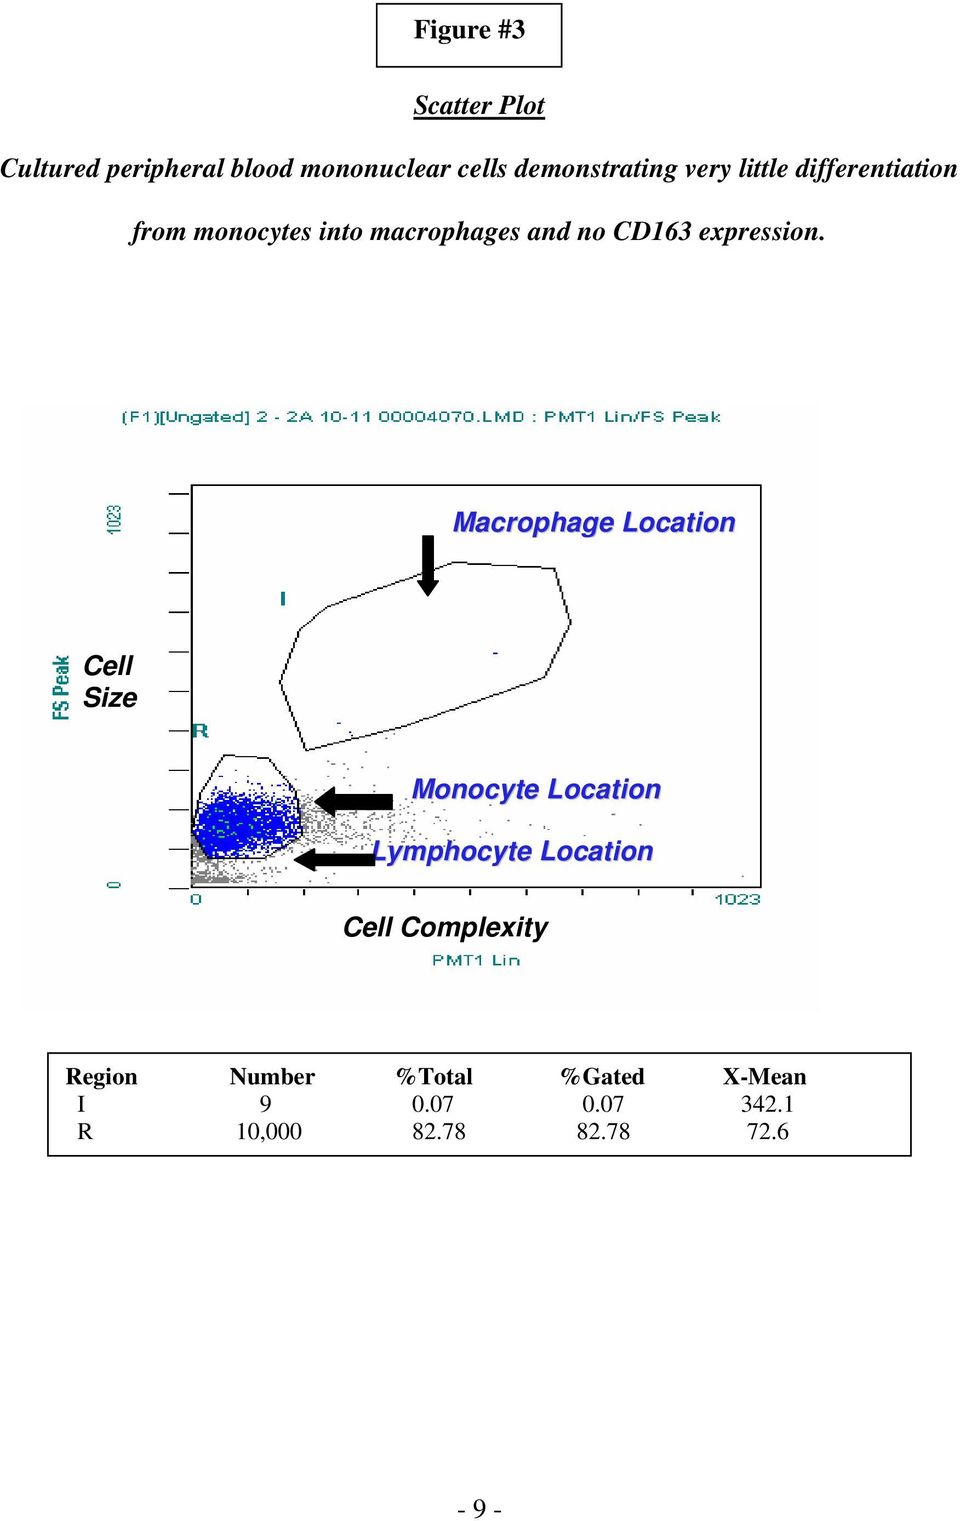 Macrophage Location Cell Size Monocyte Location Lymphocyte Location Cell Complexity